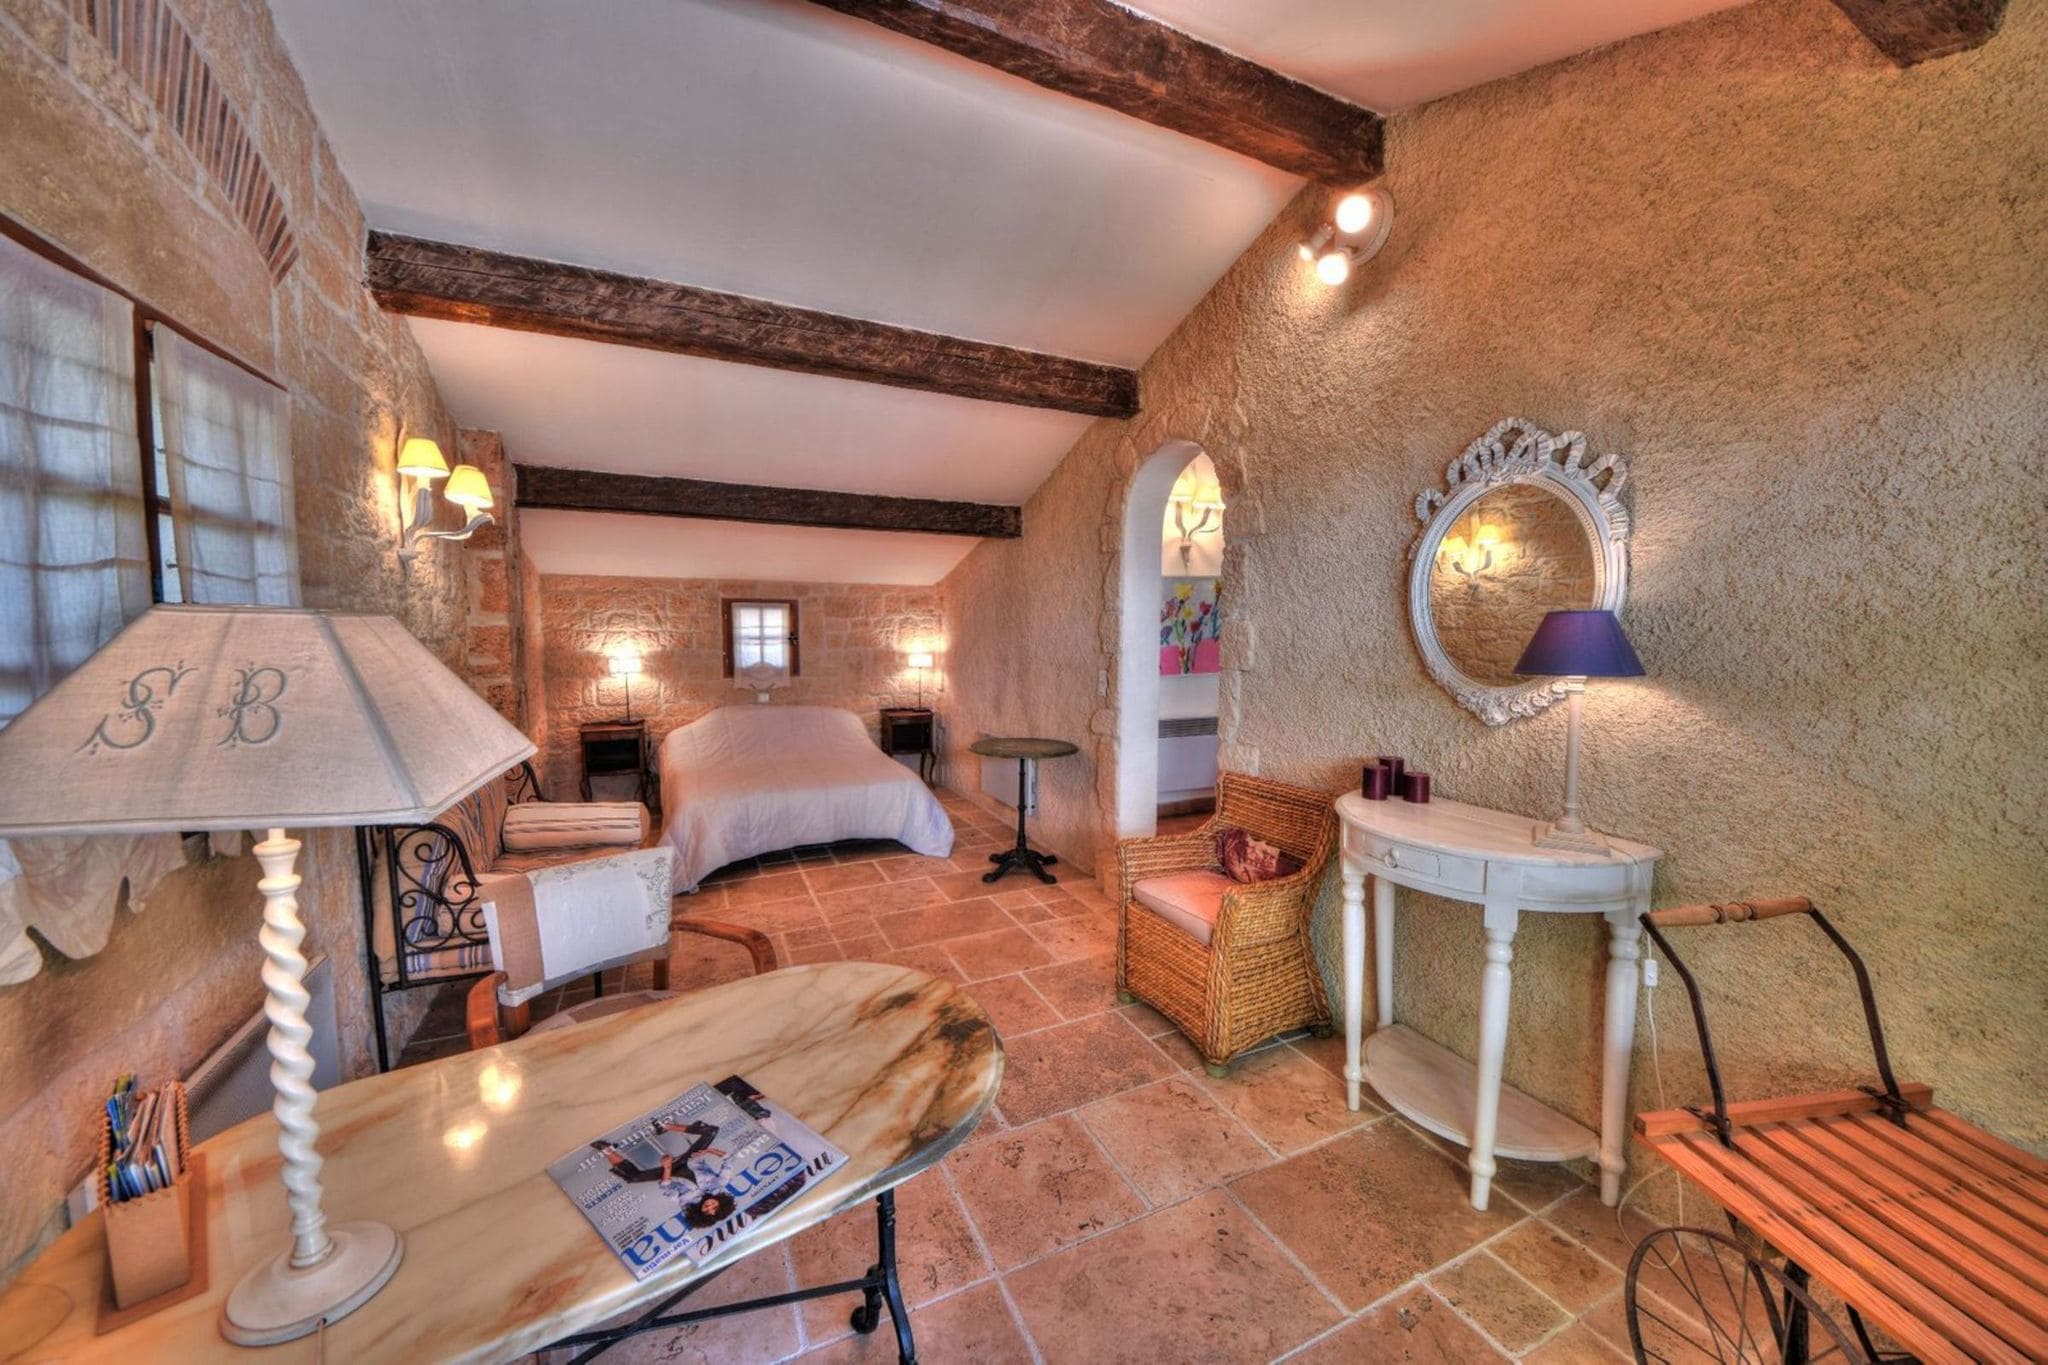 Superb character house near the lovely village of Tourtour